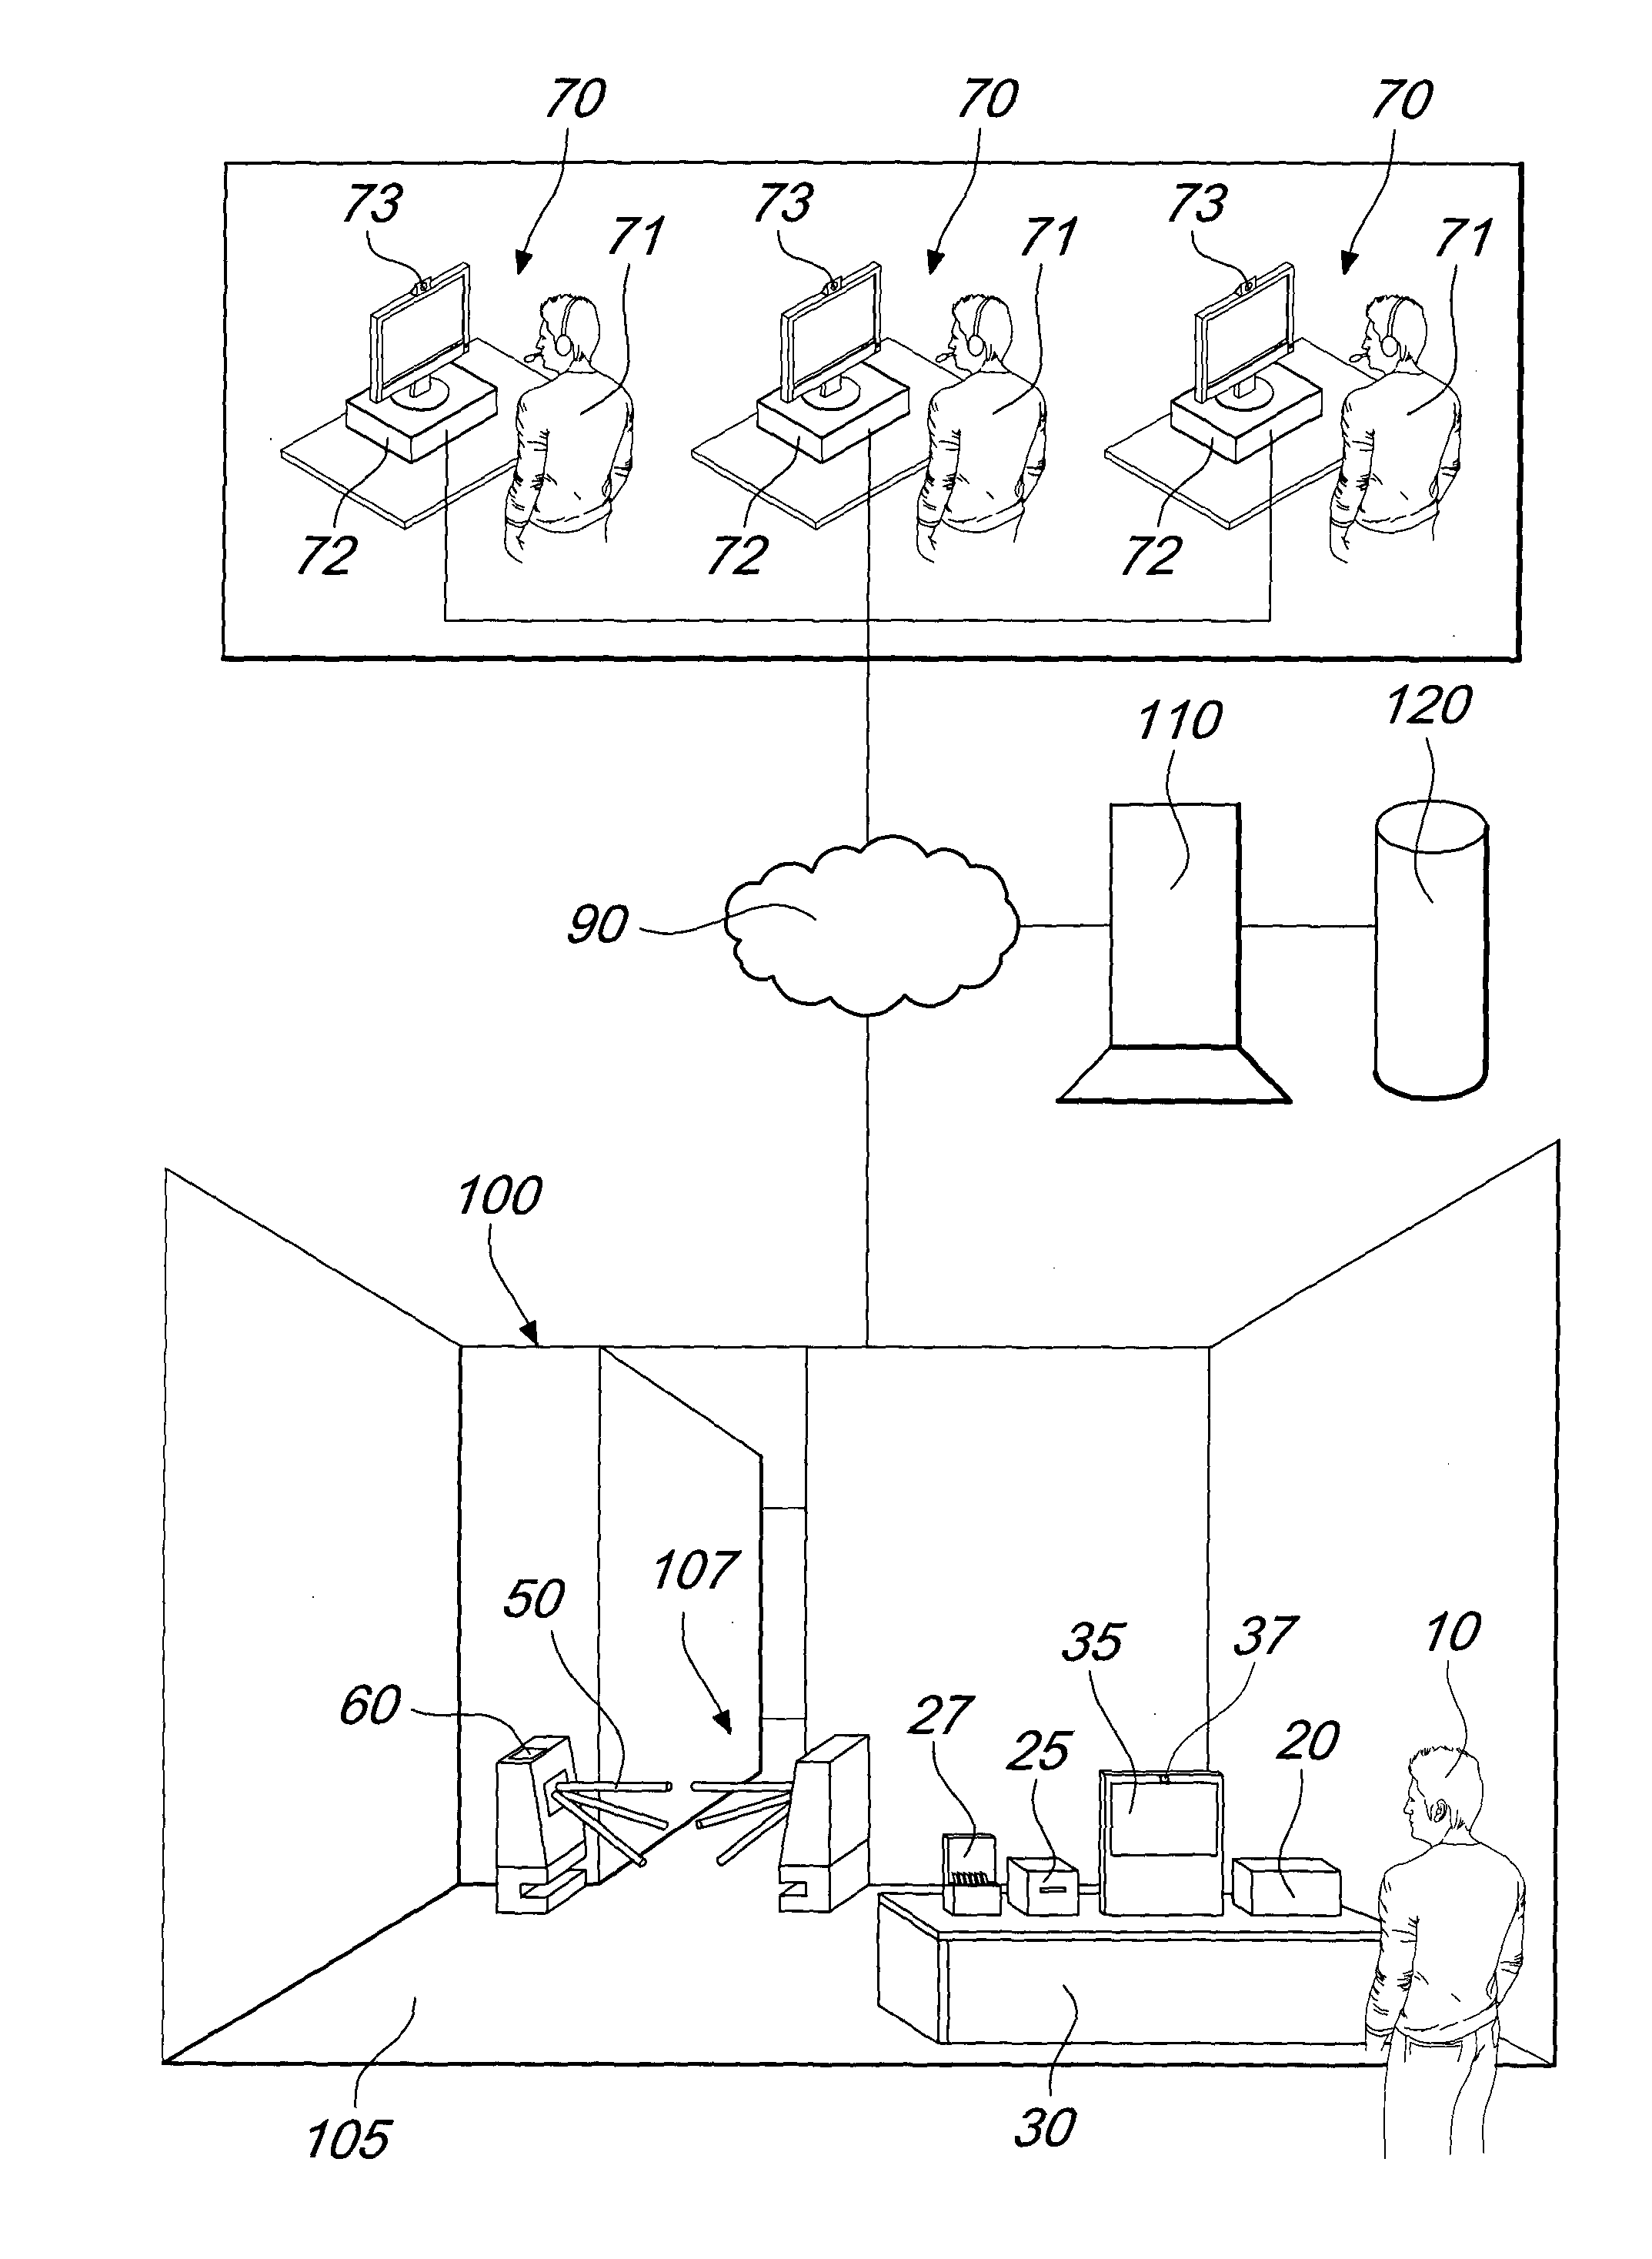 System for remotely providing services through video communication